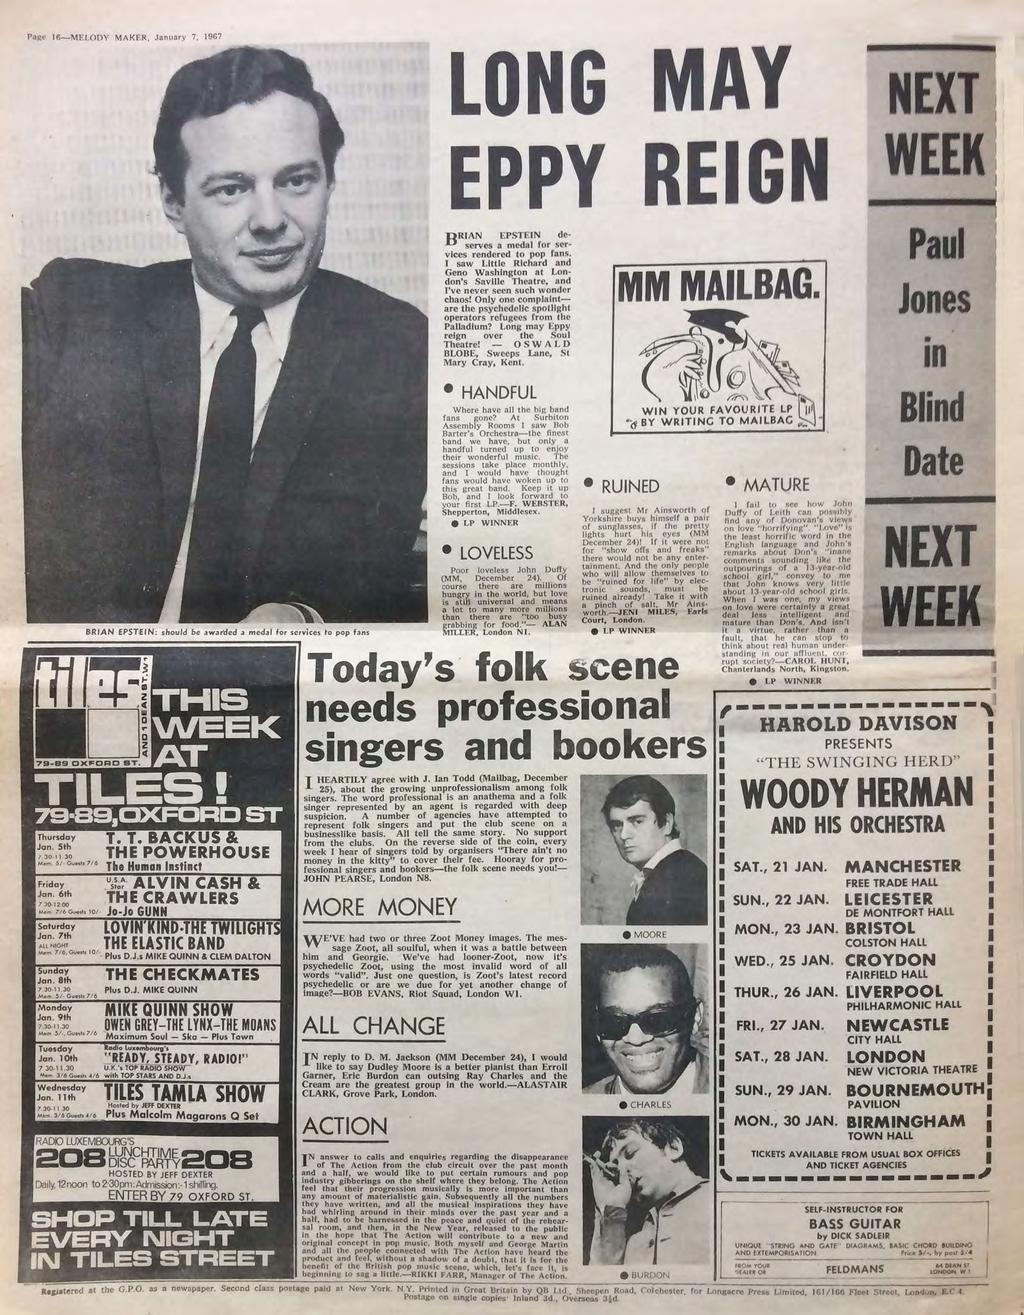 Pge 16MELODY MAKER Jnury 7, 1967 LONG MAY NEXT EPPY REGN WEEK BRAN EPSTFAN deserves medl for services rendered to pop fns sw Little Richrd nd Geno Wshington t London's Sville Thetre, nd 've never